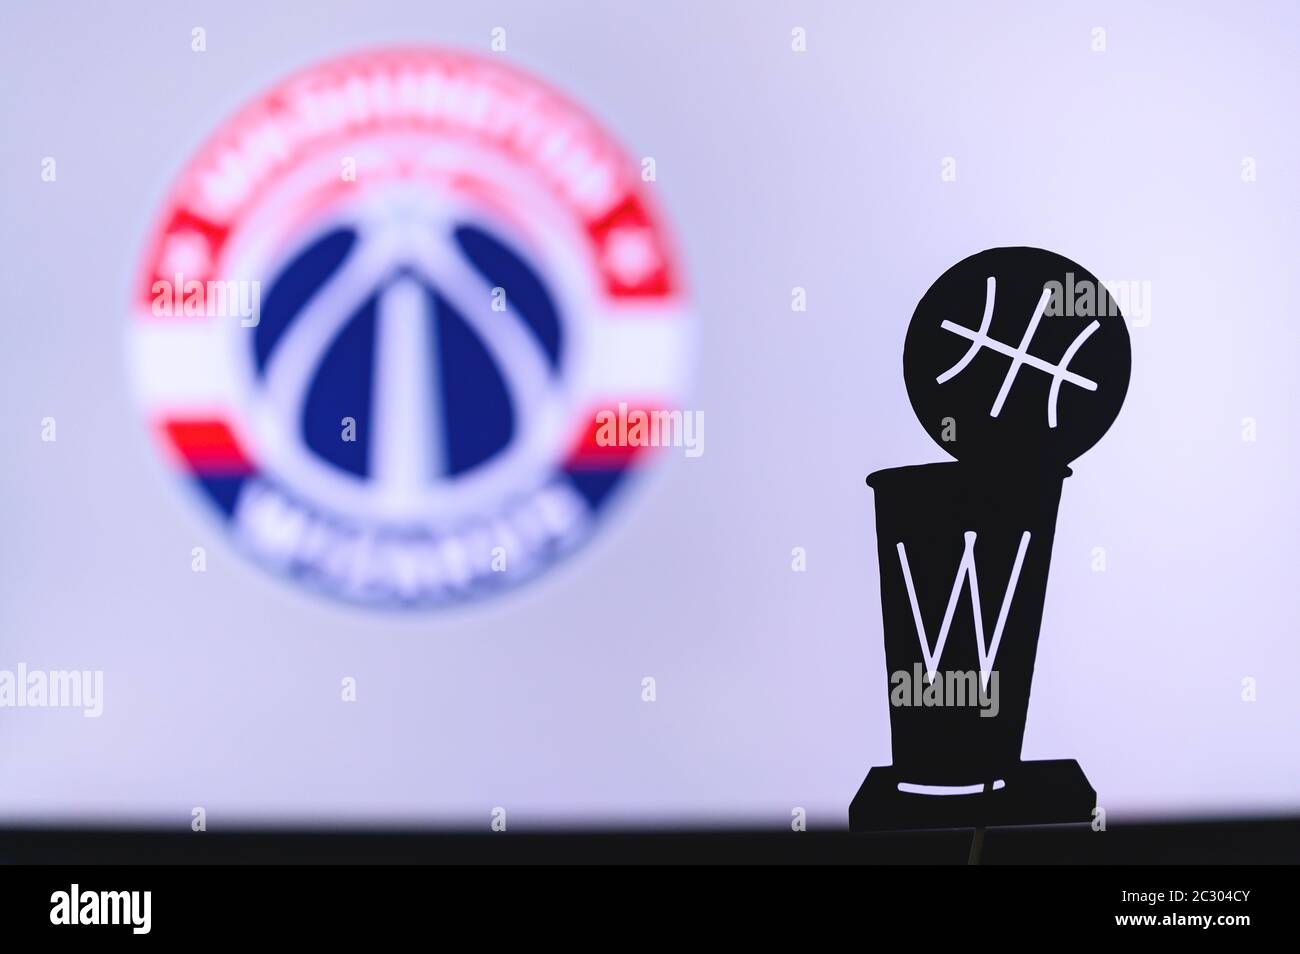 NEW YORK, USA, JUN 18, 2020: Washington Wizards Basketball club on the white screen. Silhouette of NBA trophy in foreground. Stock Photo